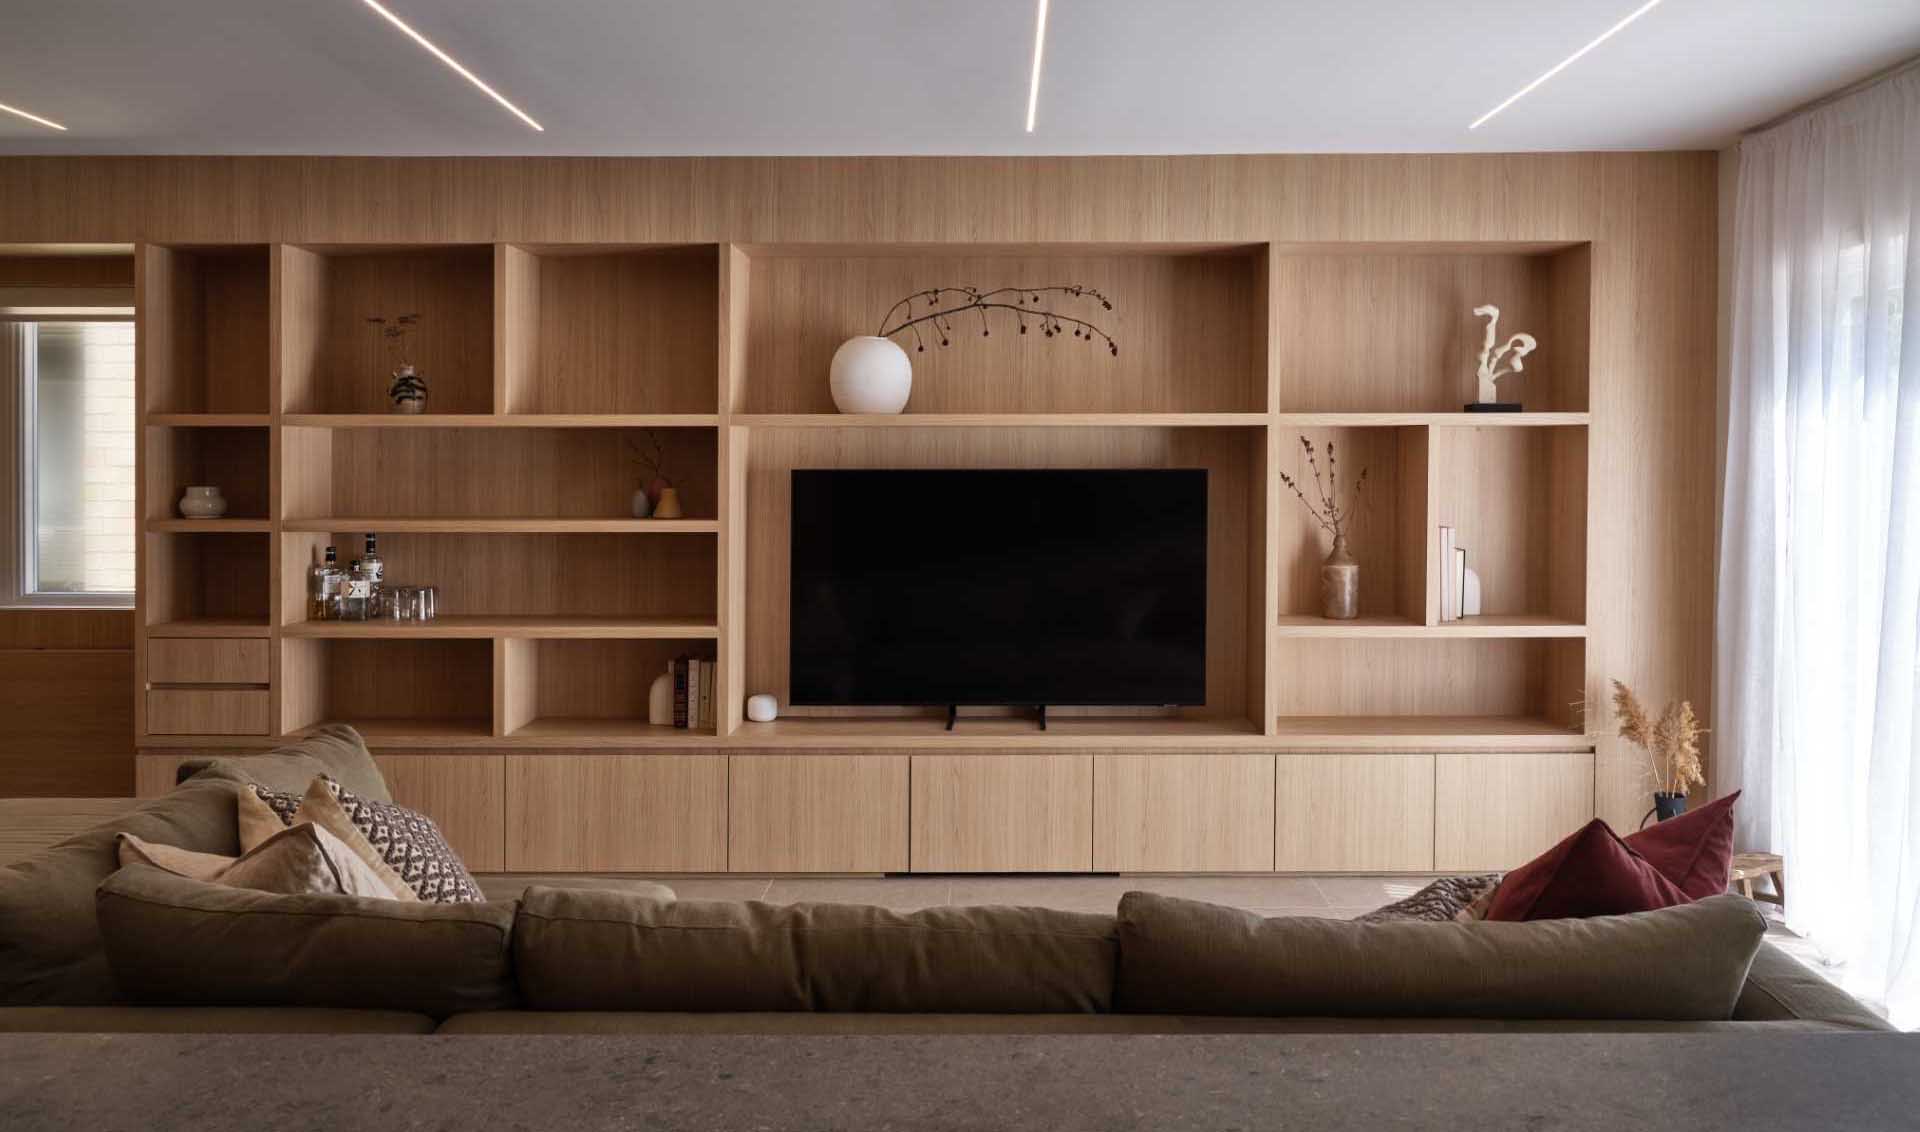 The living room and workspace are designed with wooden millwork, which surrounds the television and integrates storage, display, and flip-down tables.